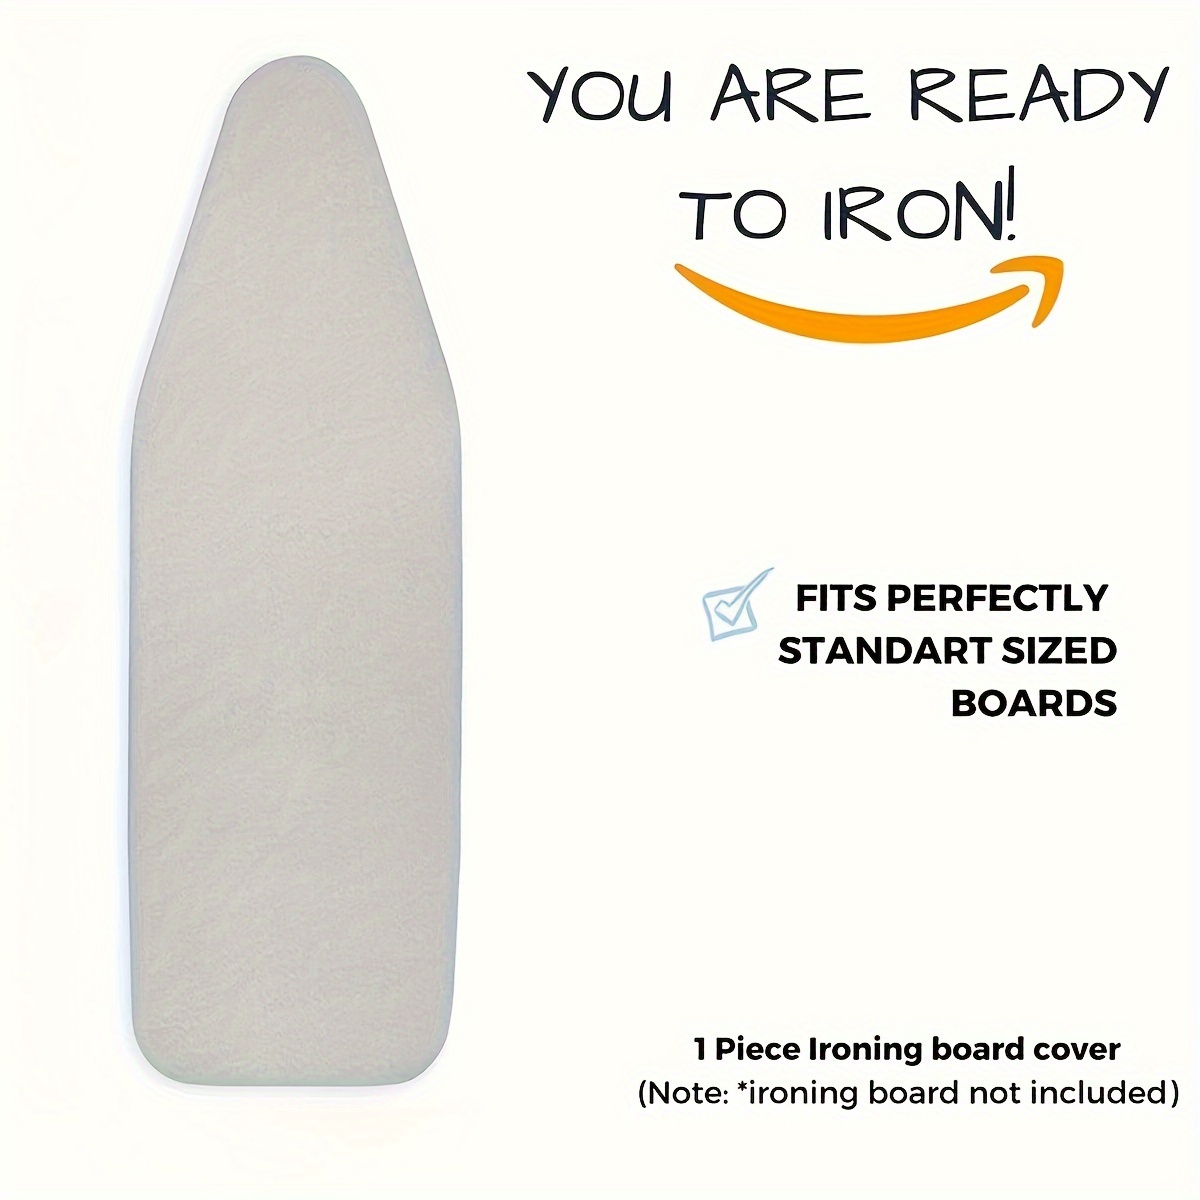 

Silicone Coated Ironing Board Cover - Fits Perfectly Standard Sized Boards: Reflects Heat, Stain & Scorch Resistant, Iron Slides Better - Suitable For 4 Standard Sizes Of